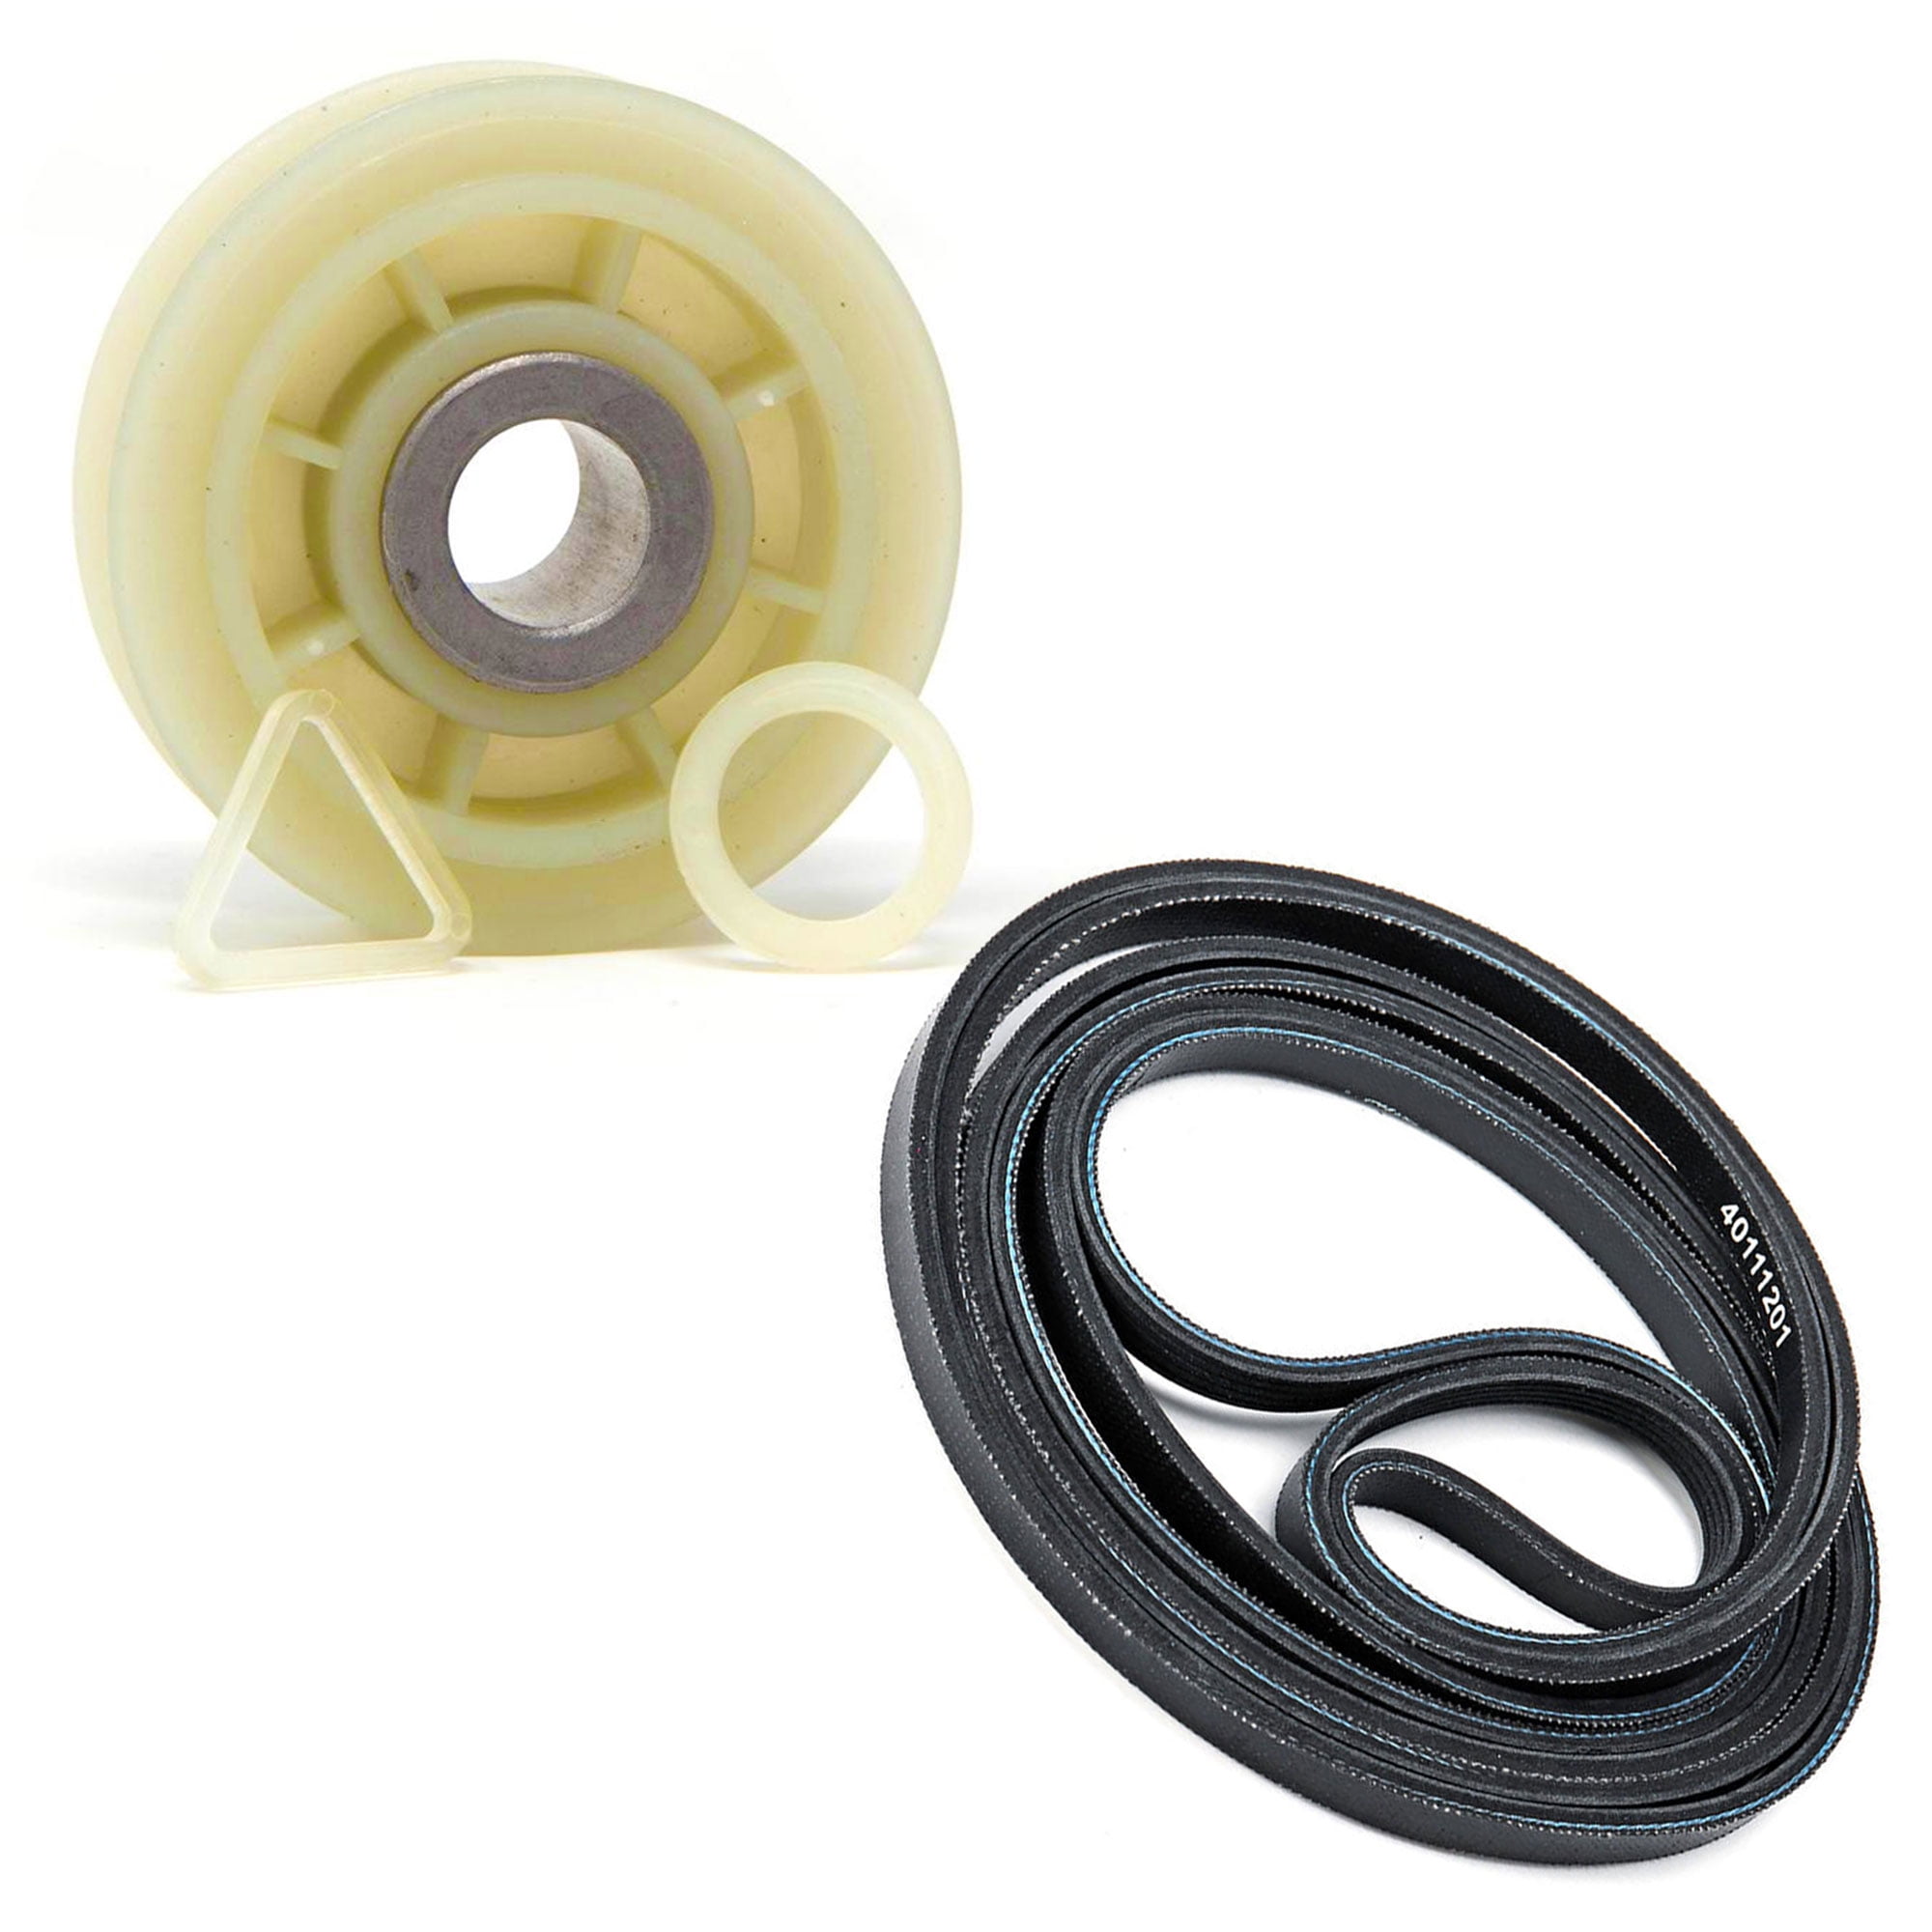 3388672 Dryer Idler Wheel and Belt Set Replaces 40111201 279640 